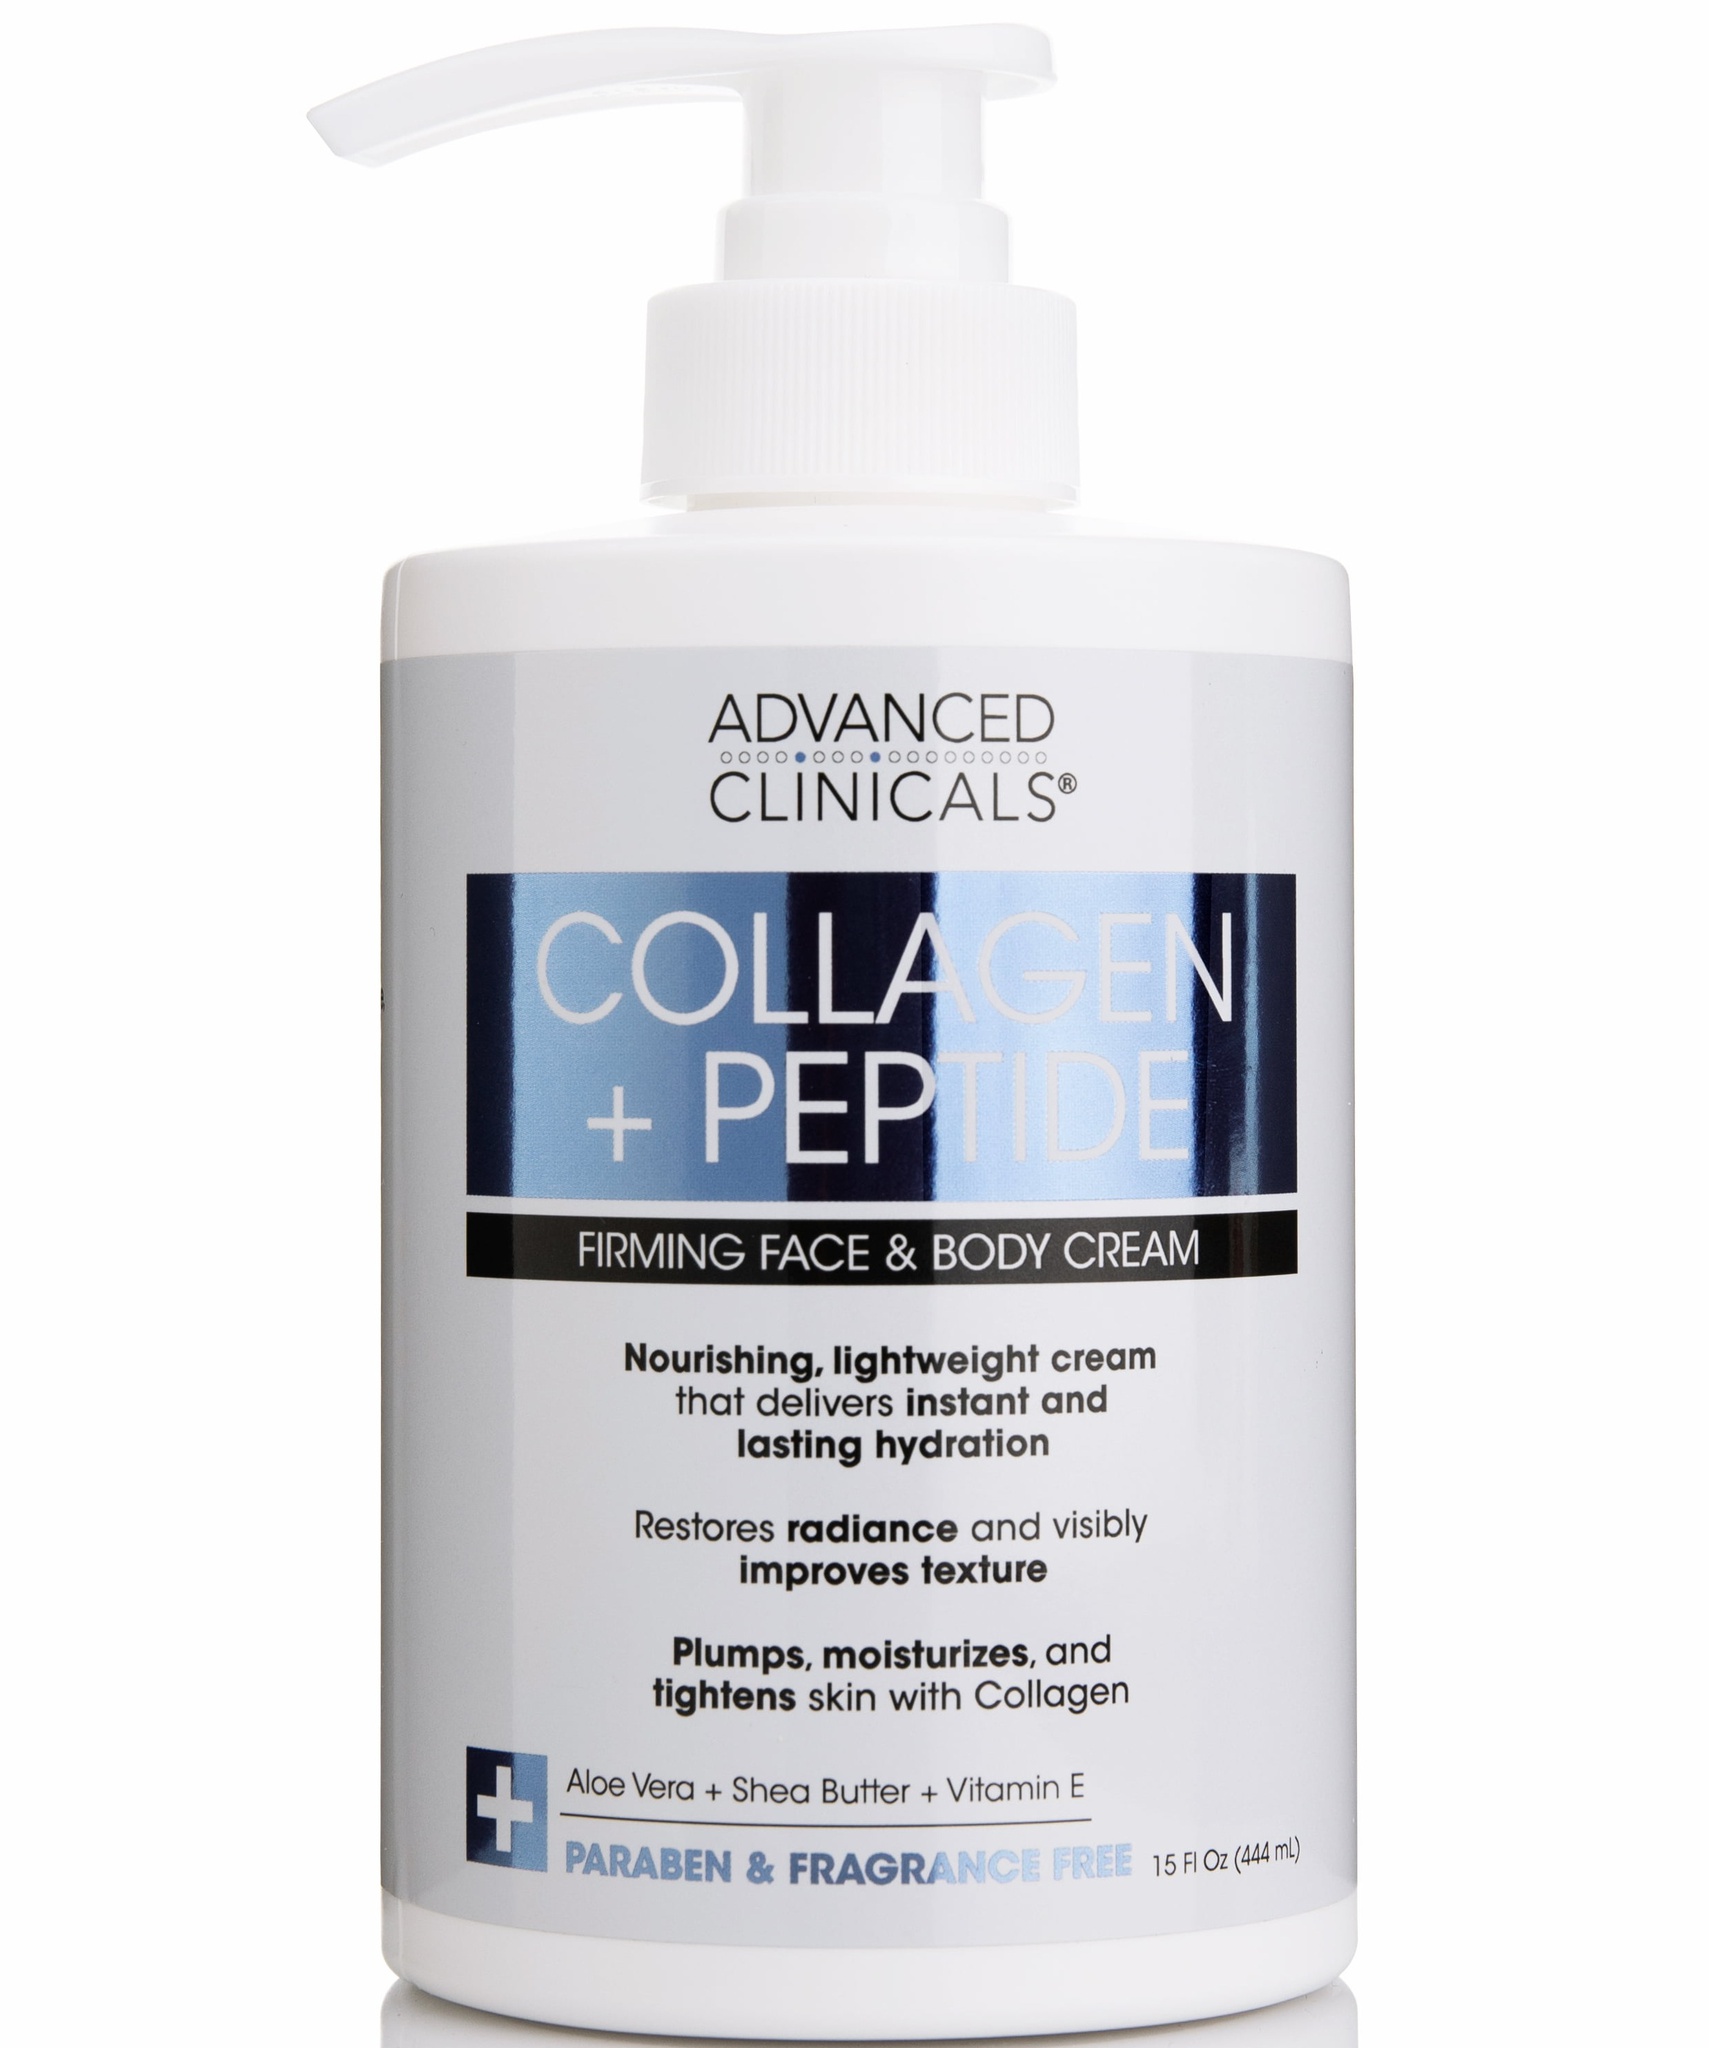 Advanced Clinicals Collagen Lotion + Peptide Firming Face And Body Cream